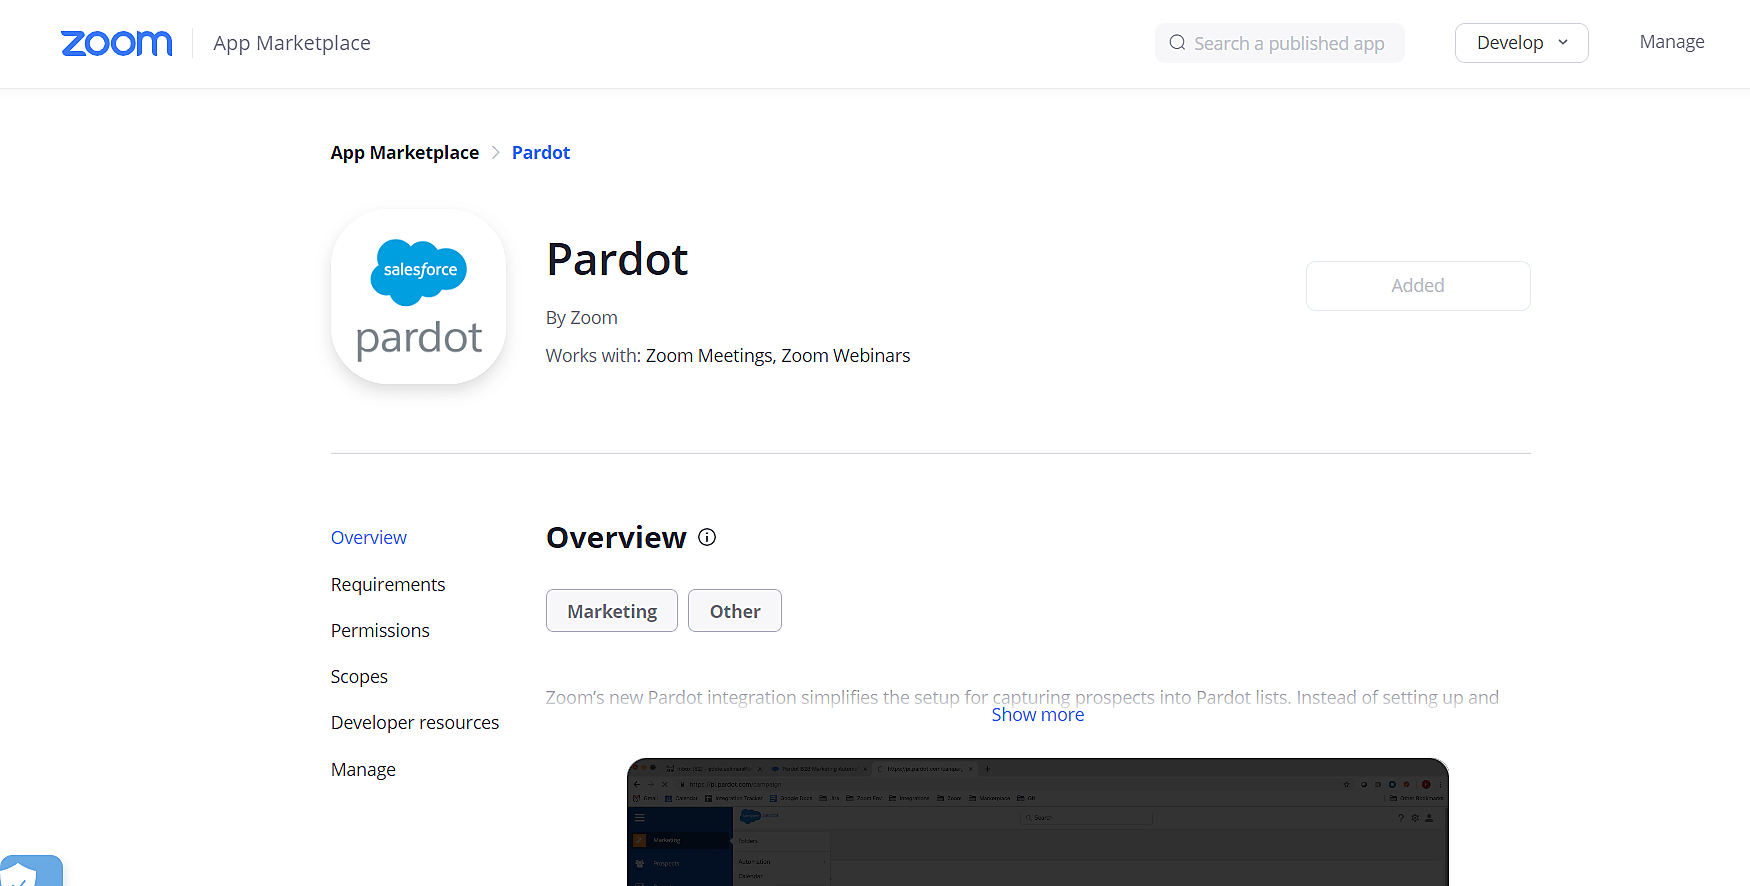 Go to Zoom App Marketplace and search for the Pardot